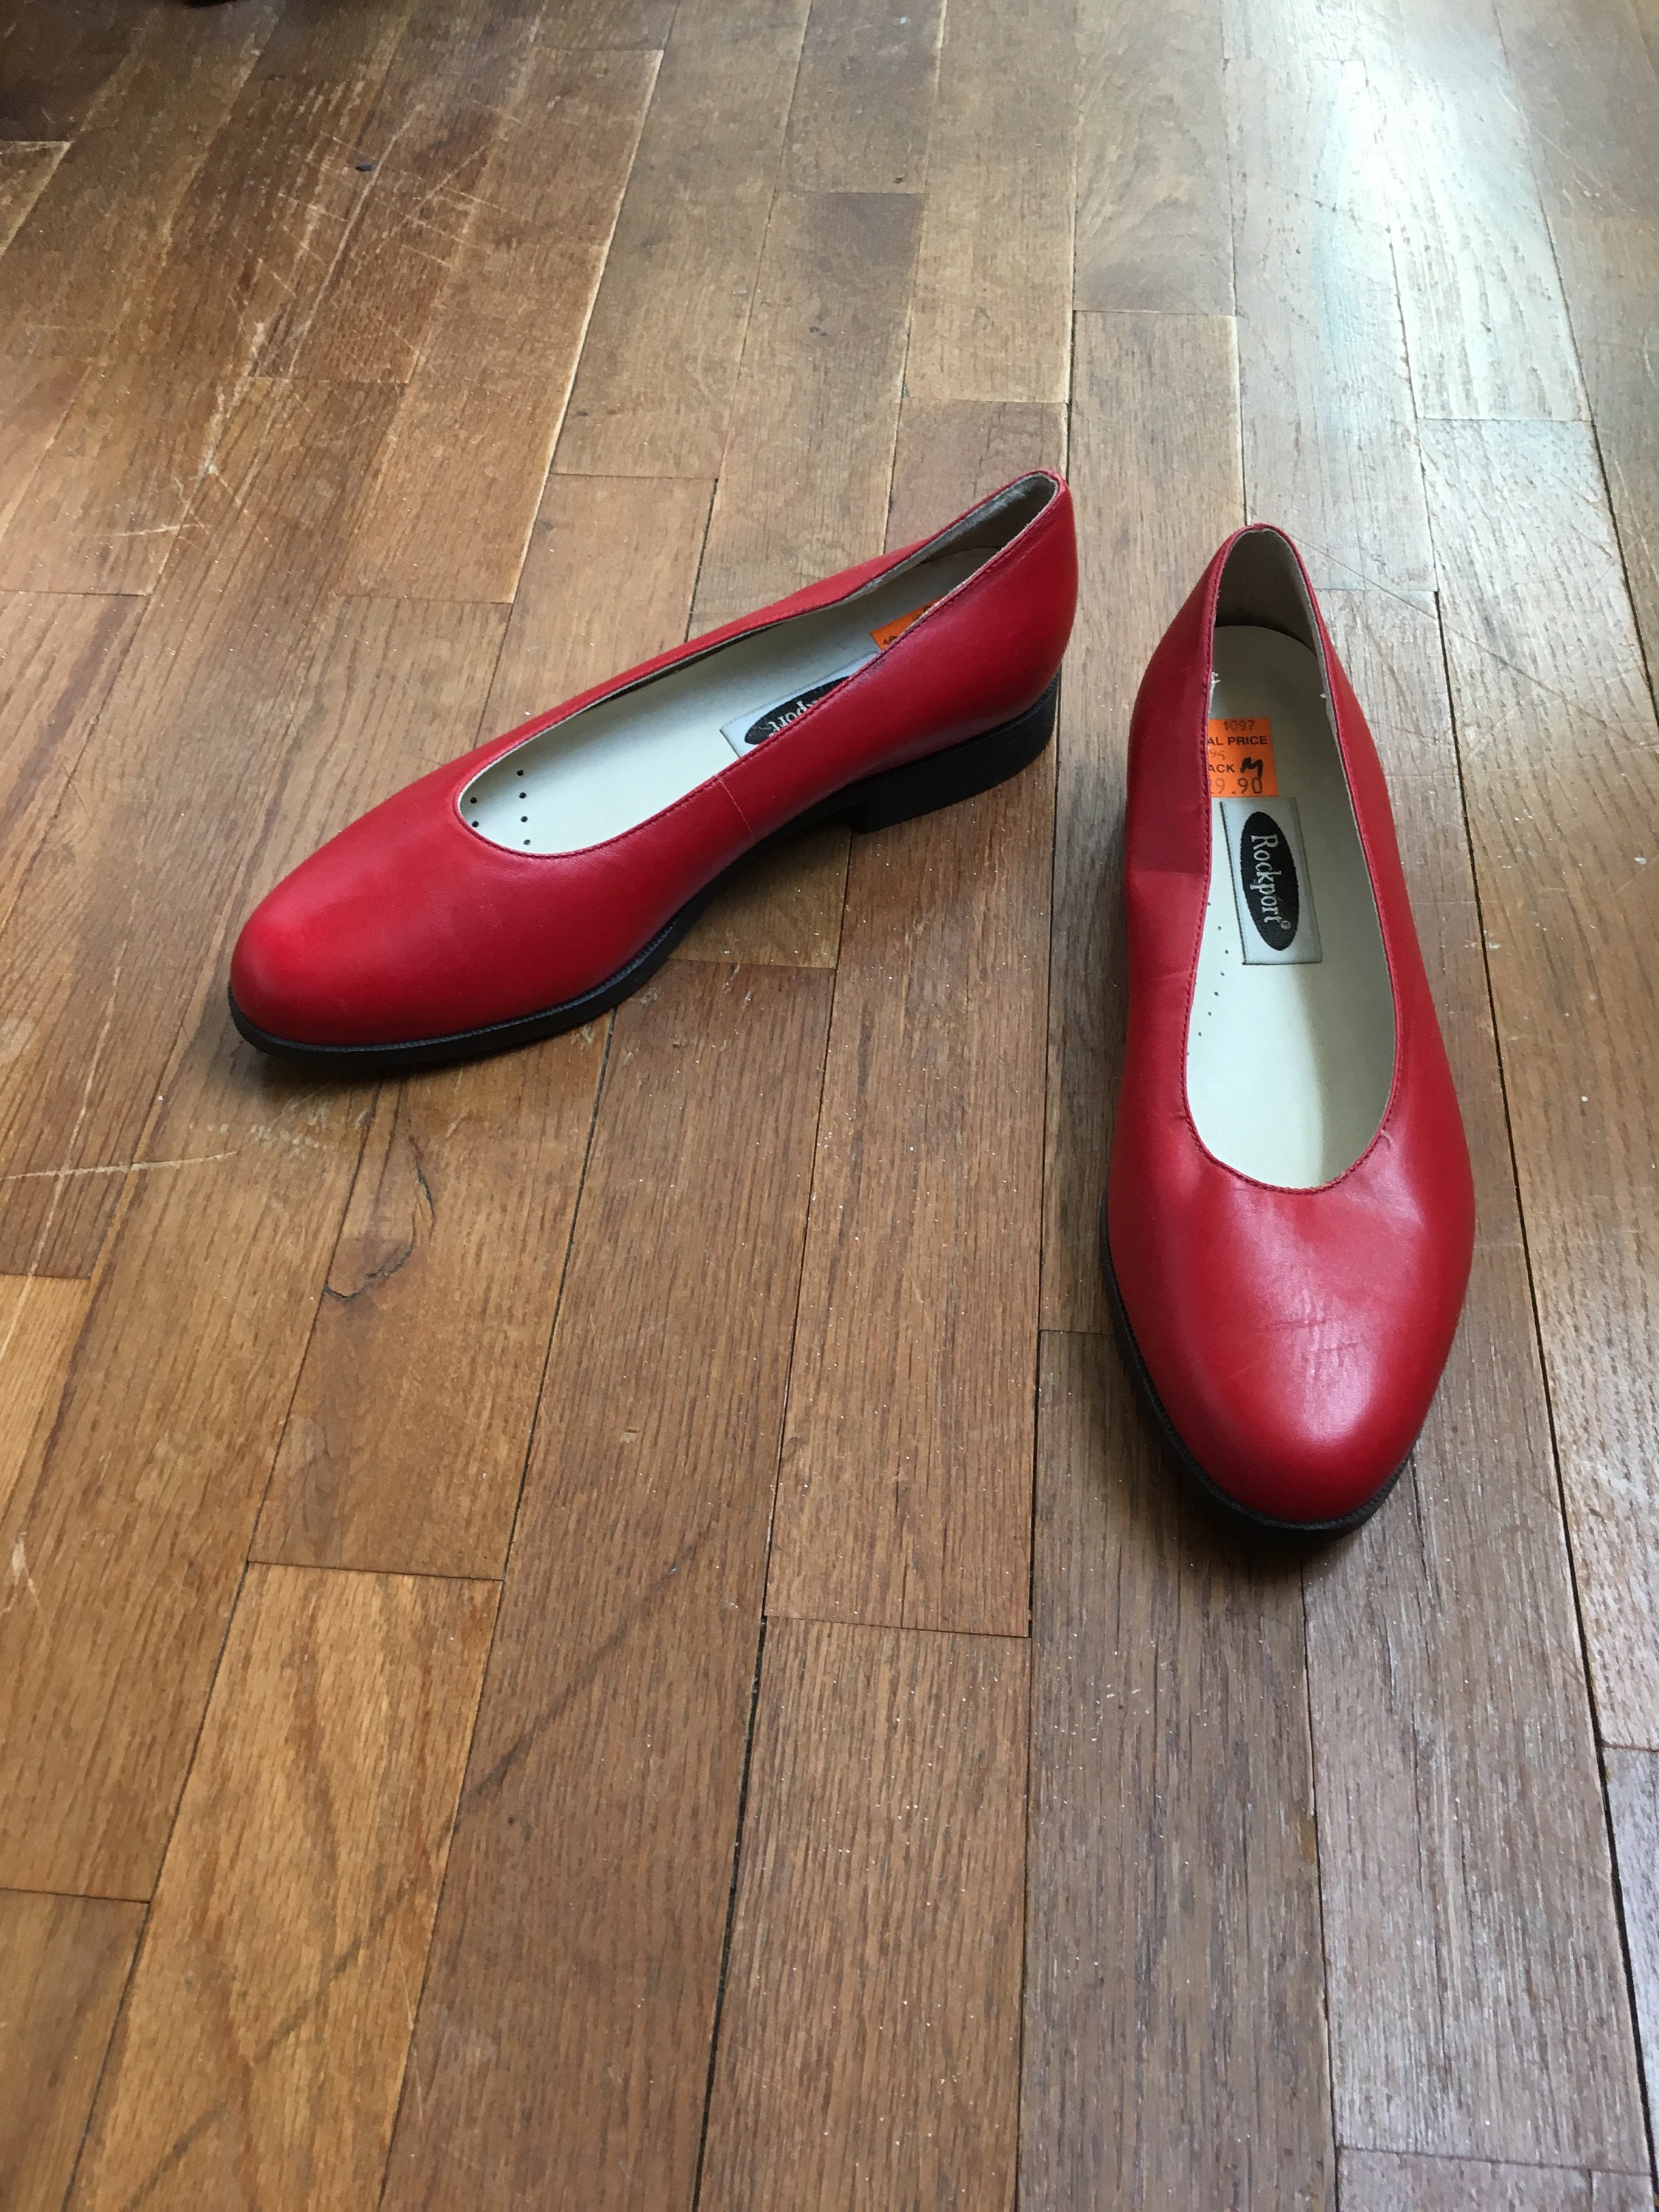 Vintage 80s rockport nos red leather slip on women's shoes | Etsy